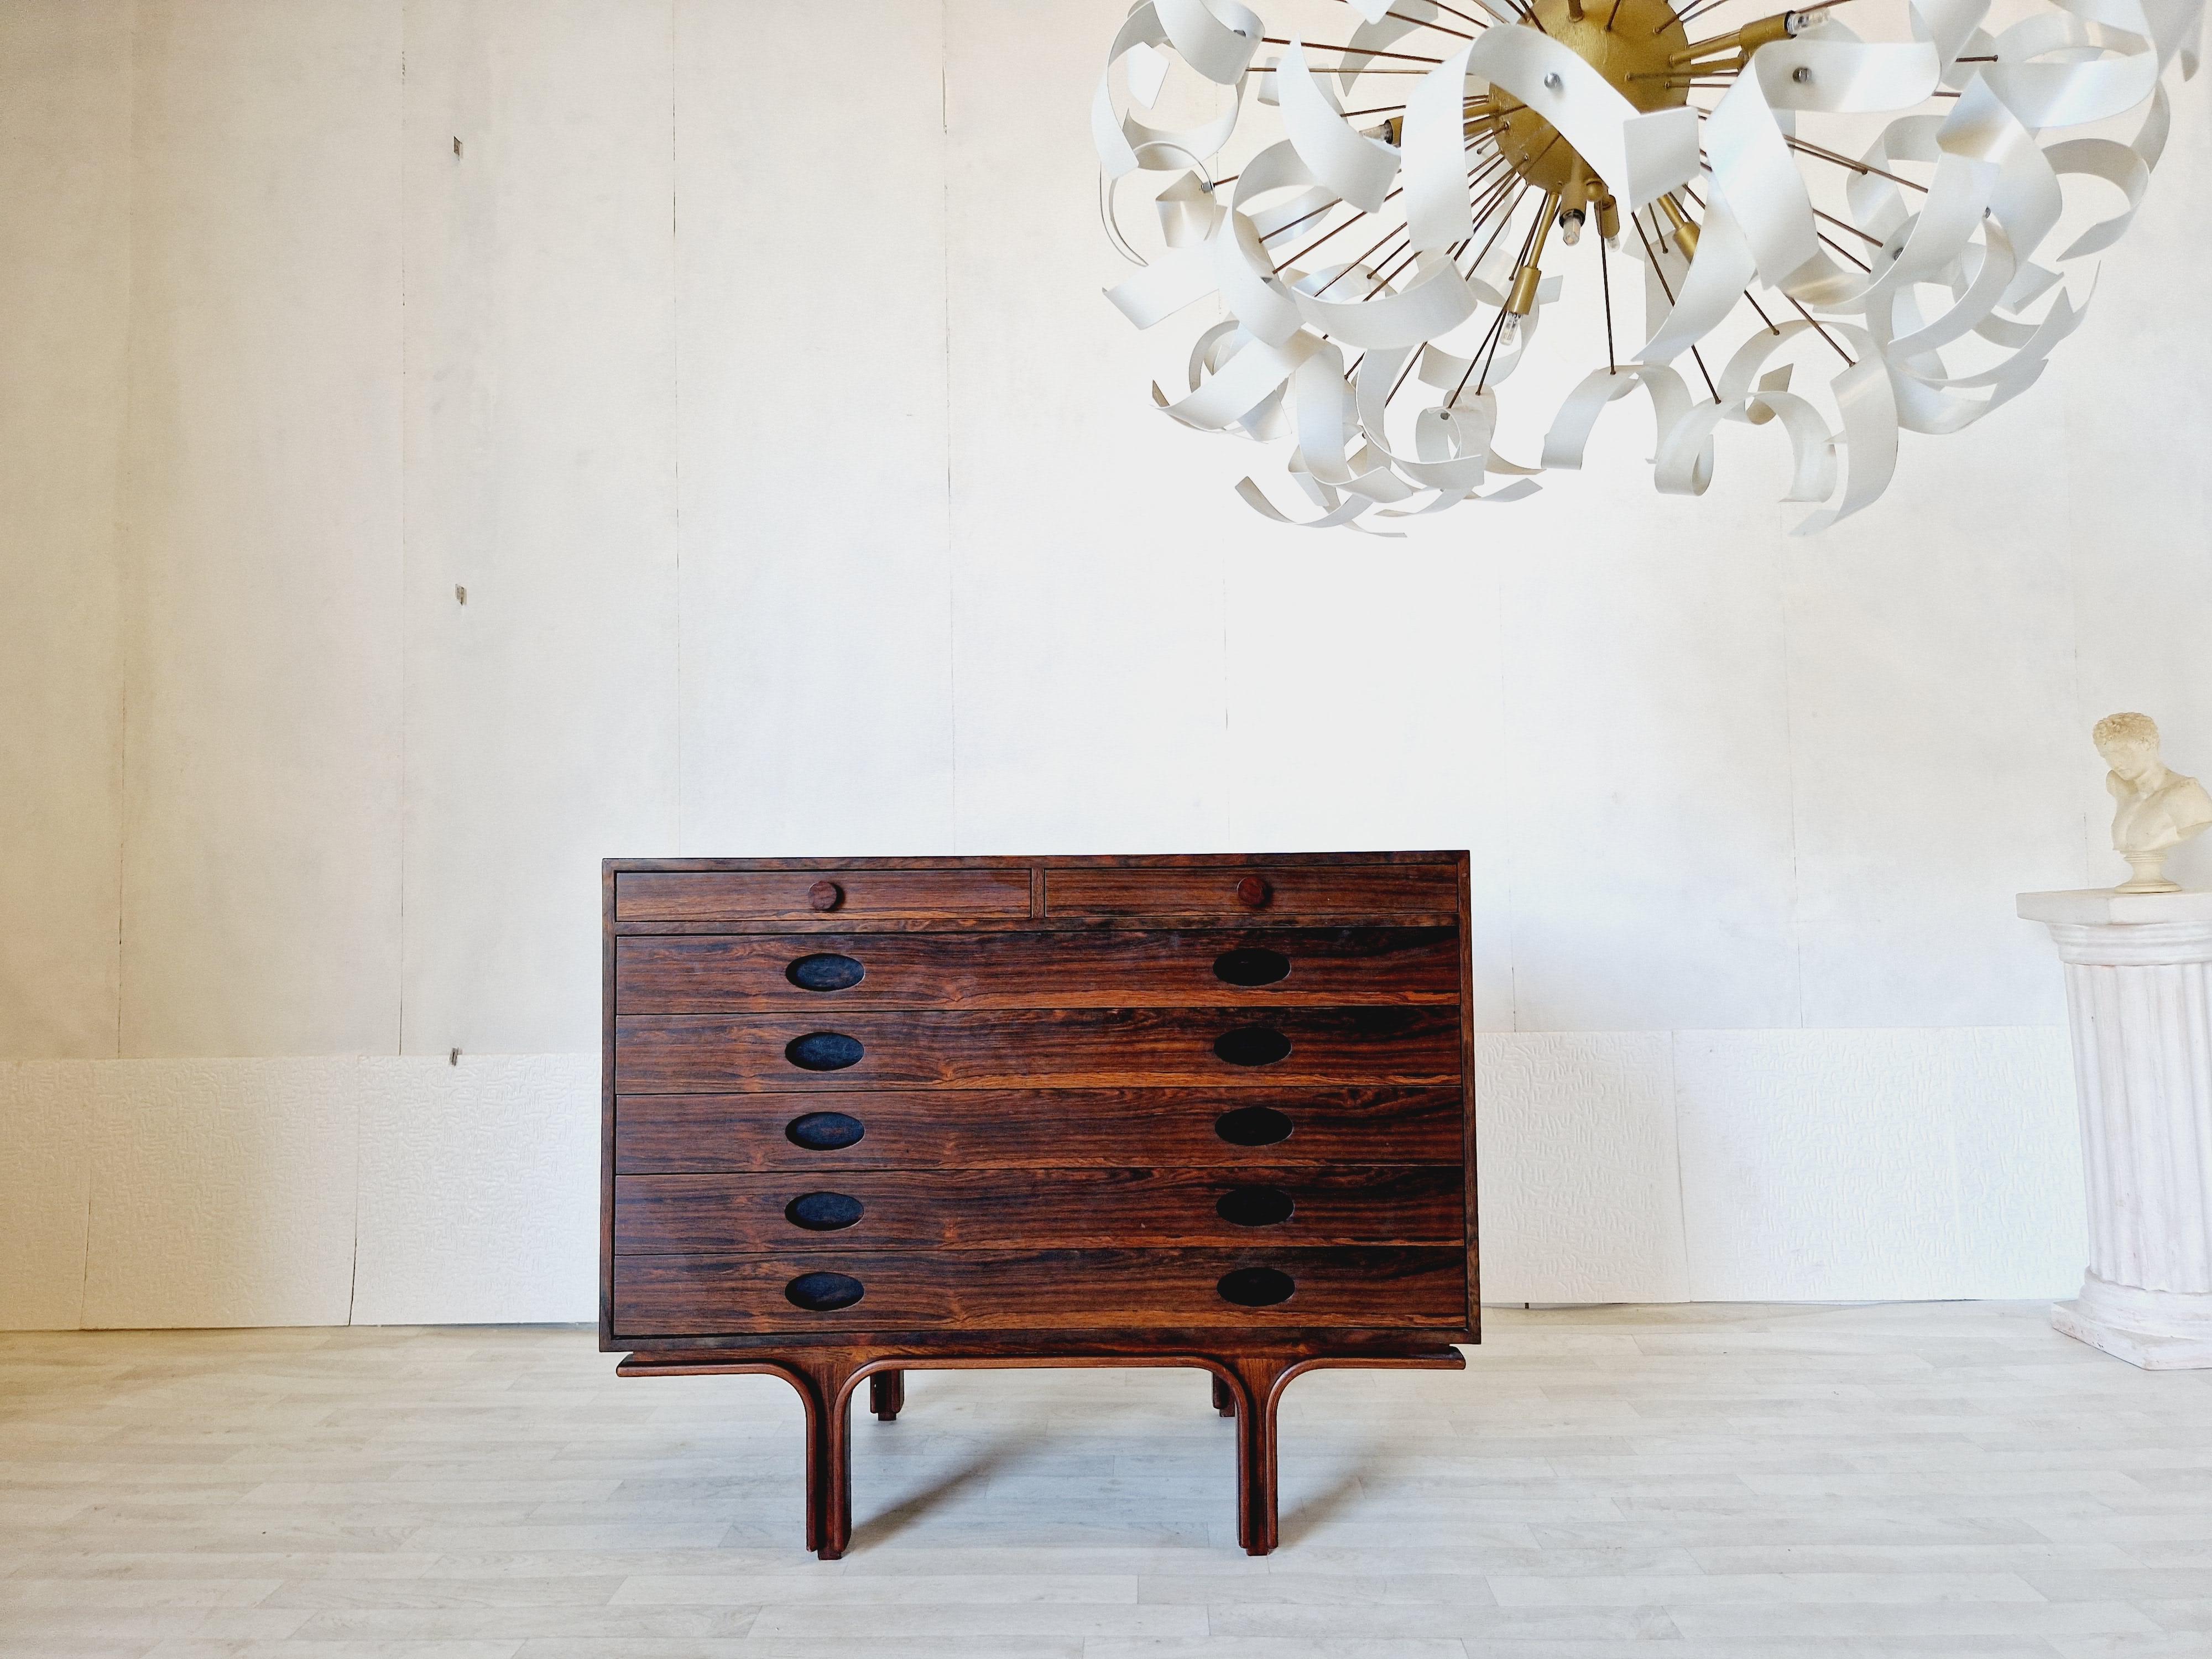 
This stunning vintage chest of drawers is a true statement piece for any room. It has a beautiful Rosewood finish and smooth features, with cup handles that add a touch of mid-century modern style. The seven original drawers provide plenty of